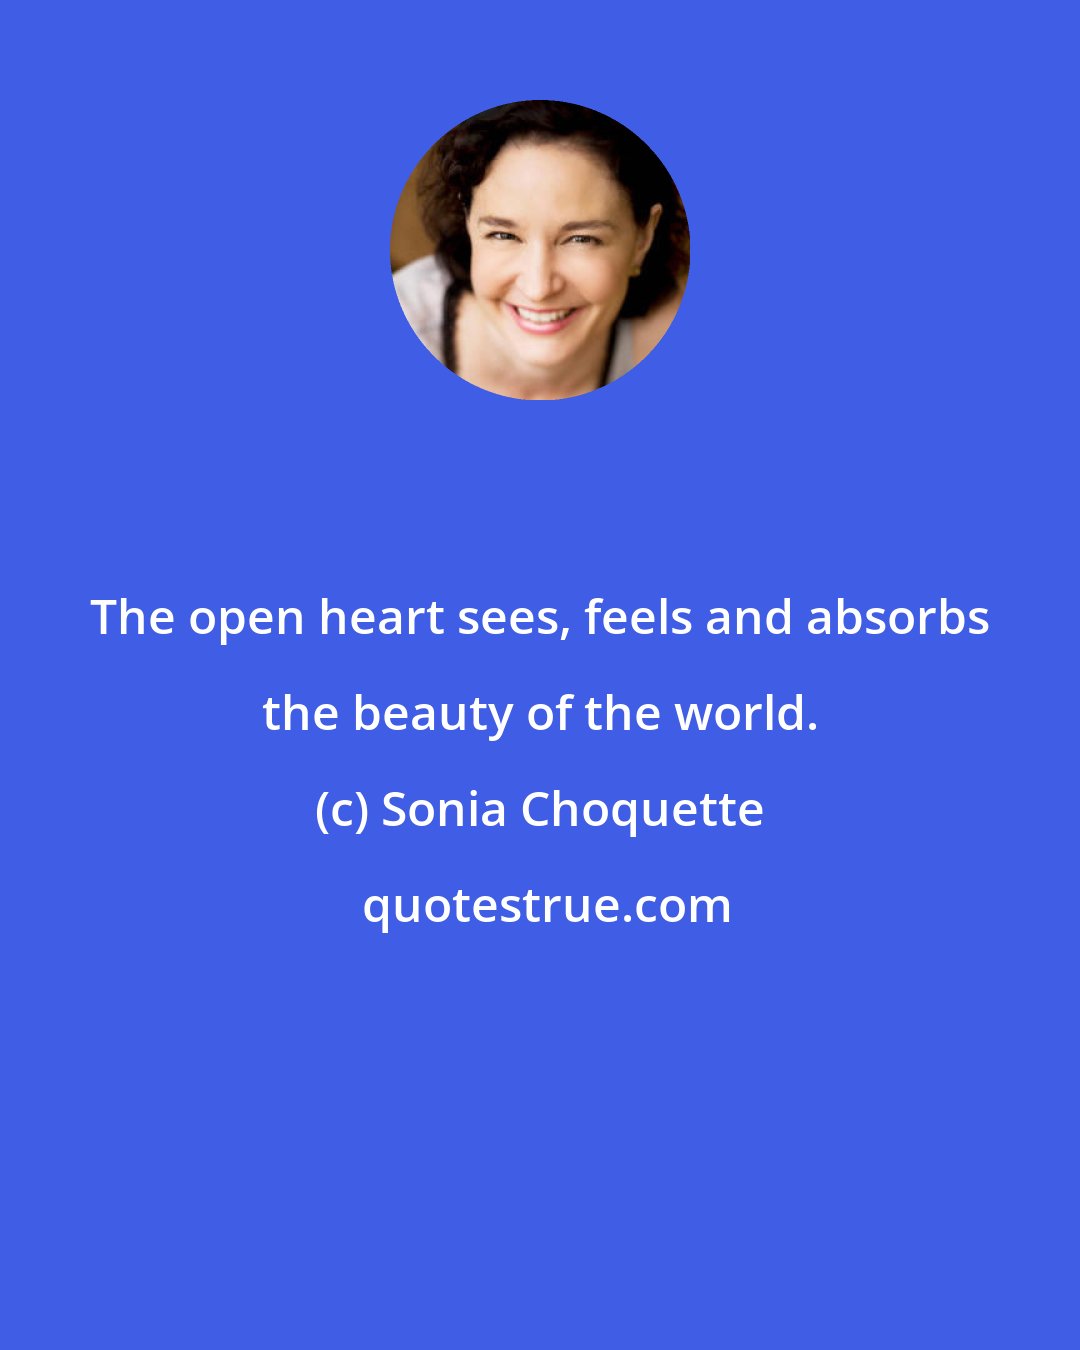 Sonia Choquette: The open heart sees, feels and absorbs the beauty of the world.